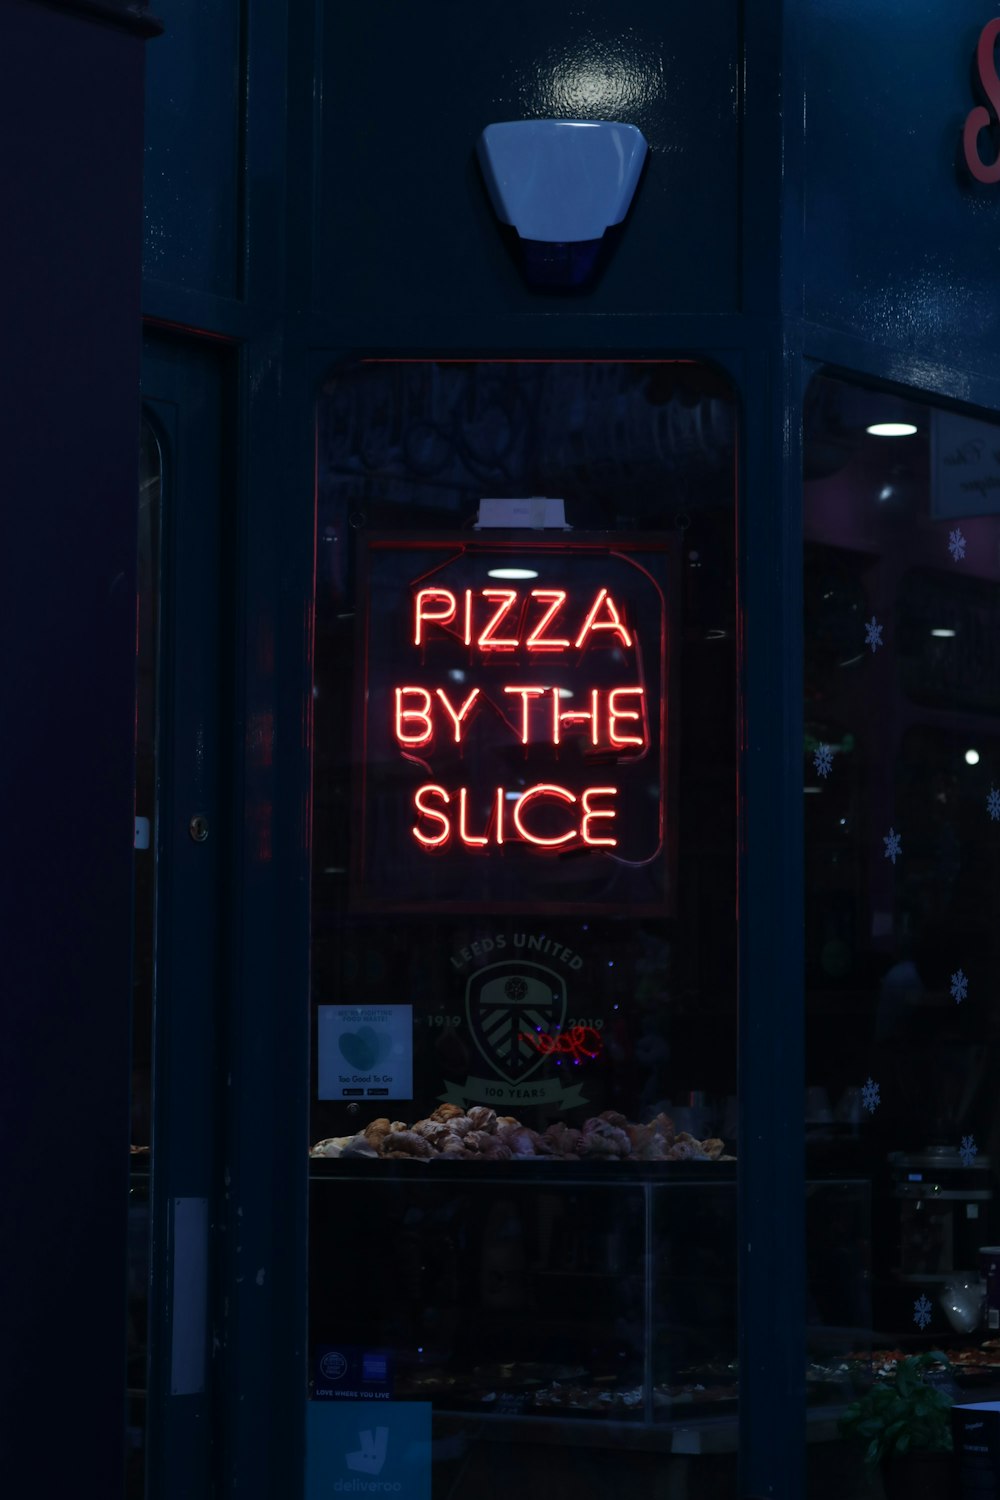 Pizza By the Slice ネオンサイネージ